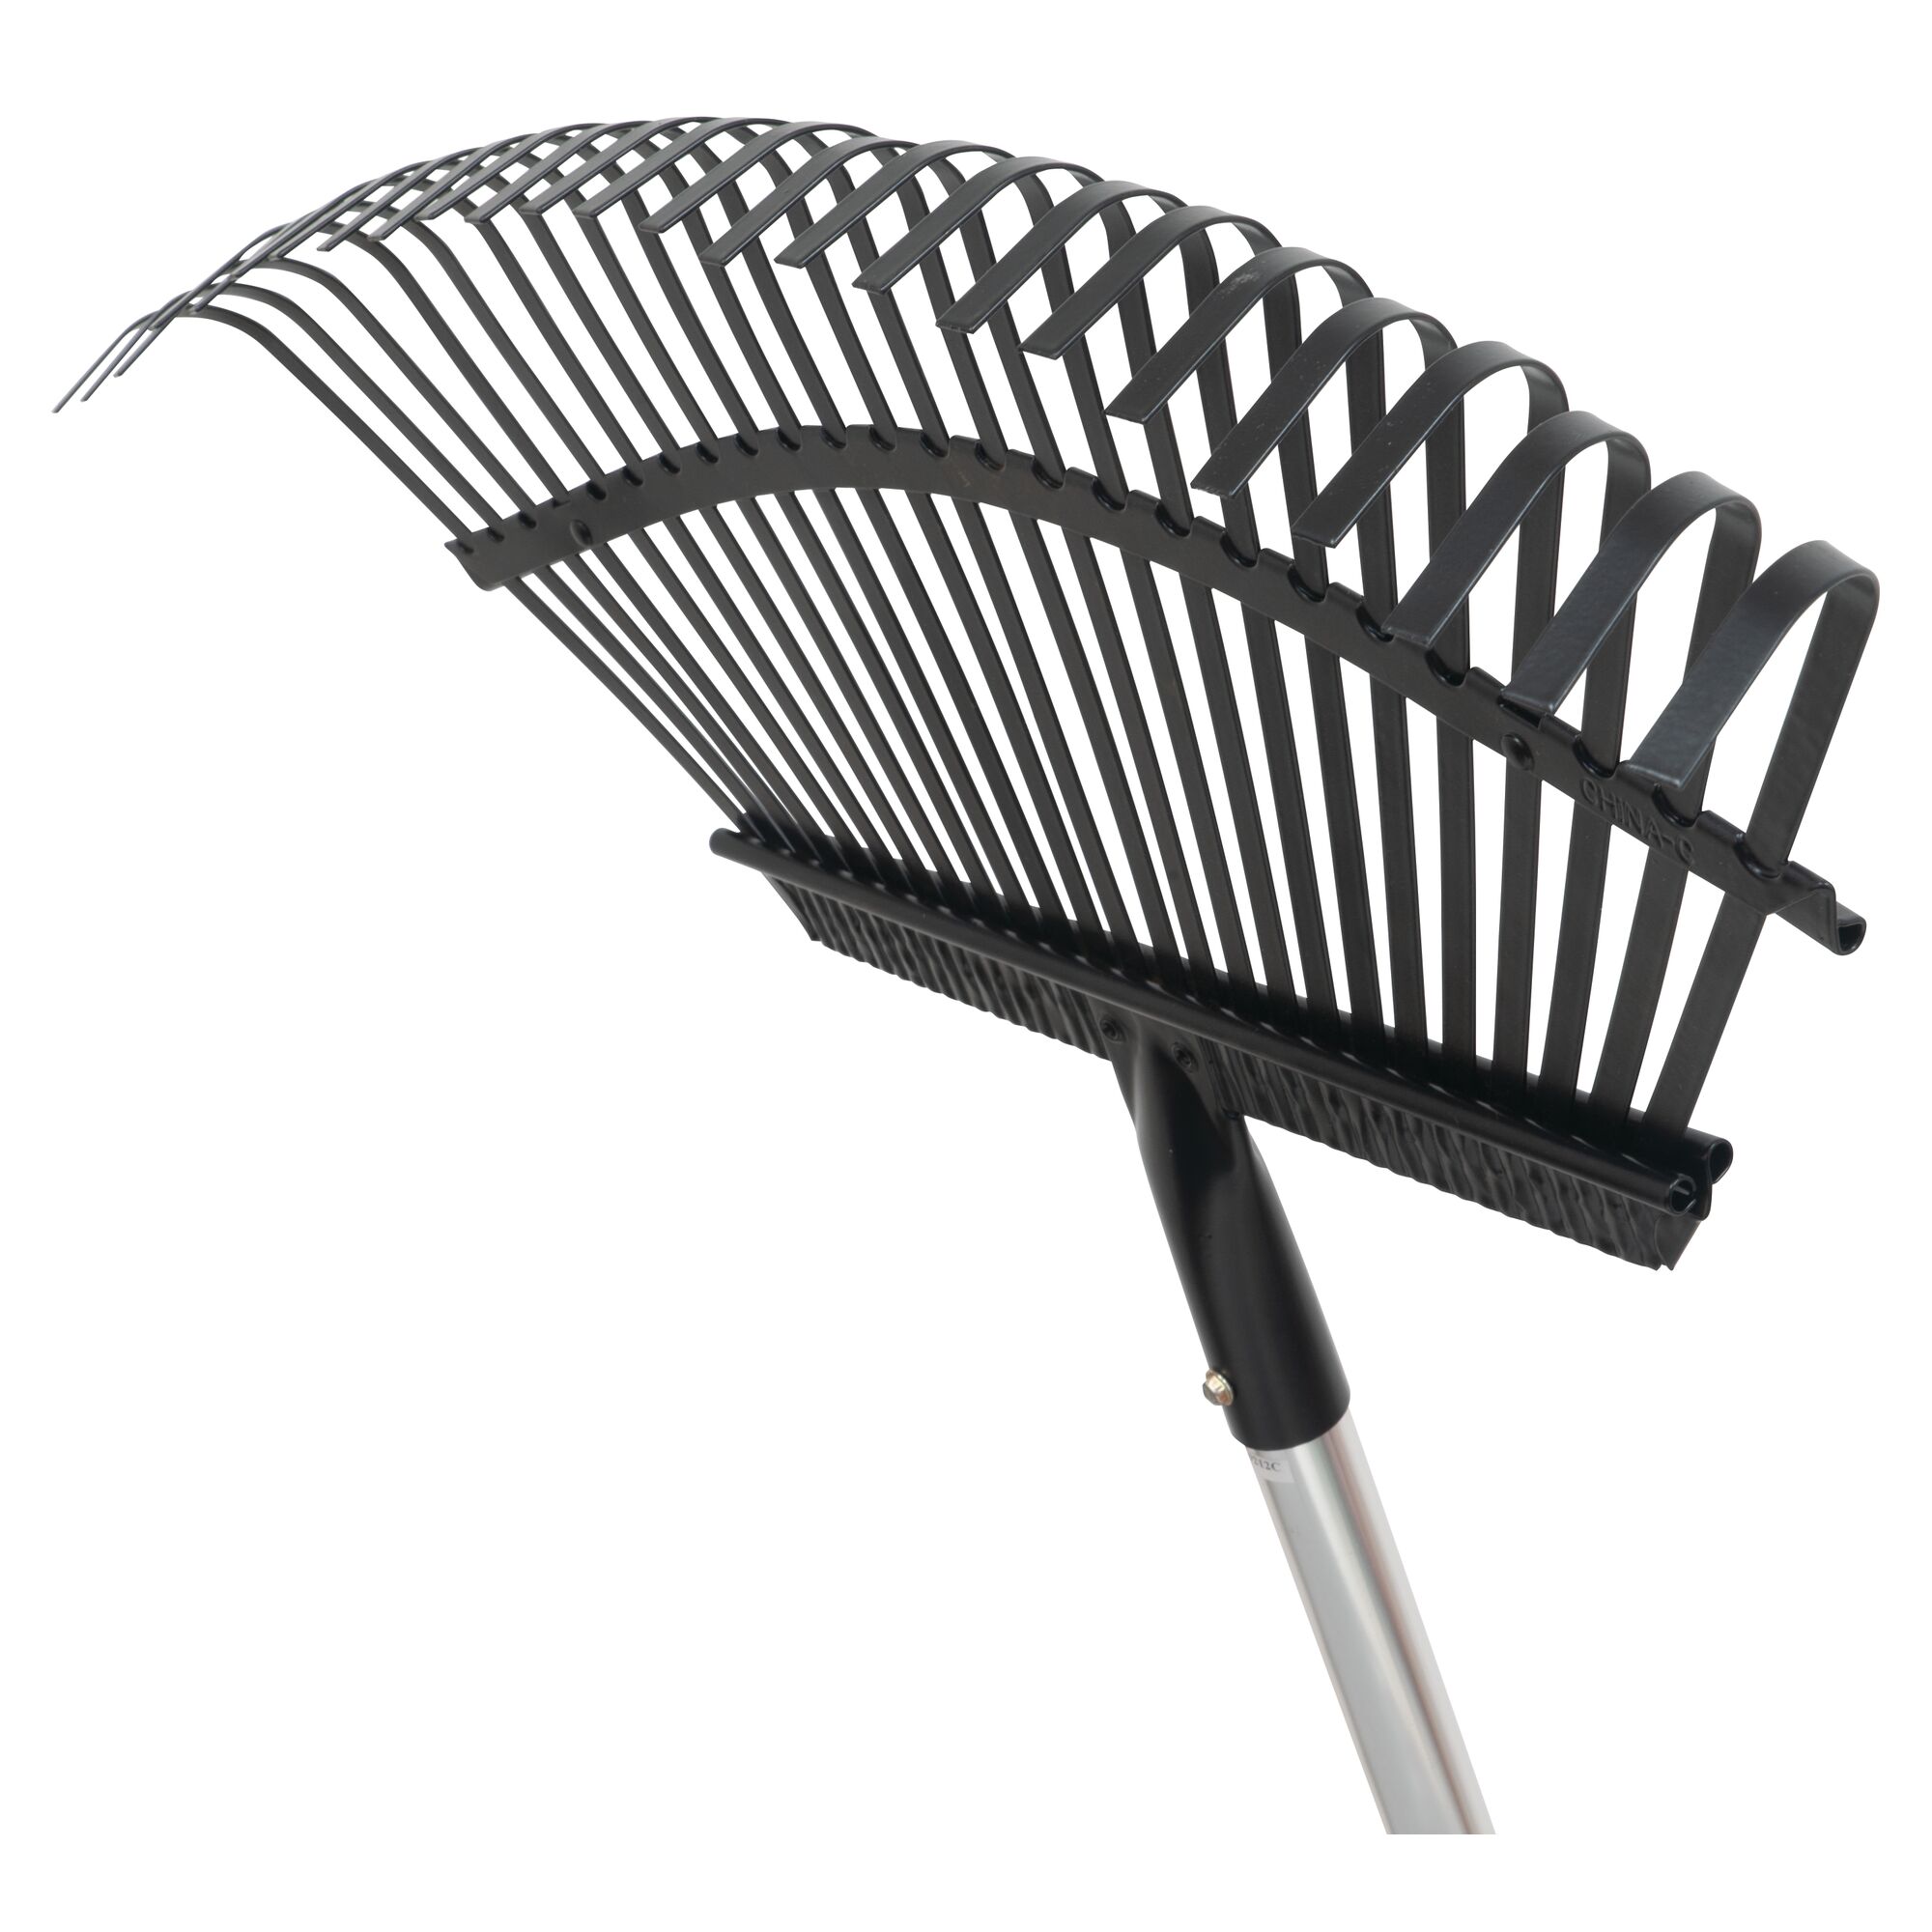 High performance tines feature of a 25 tine aluminum handle lawn rake.